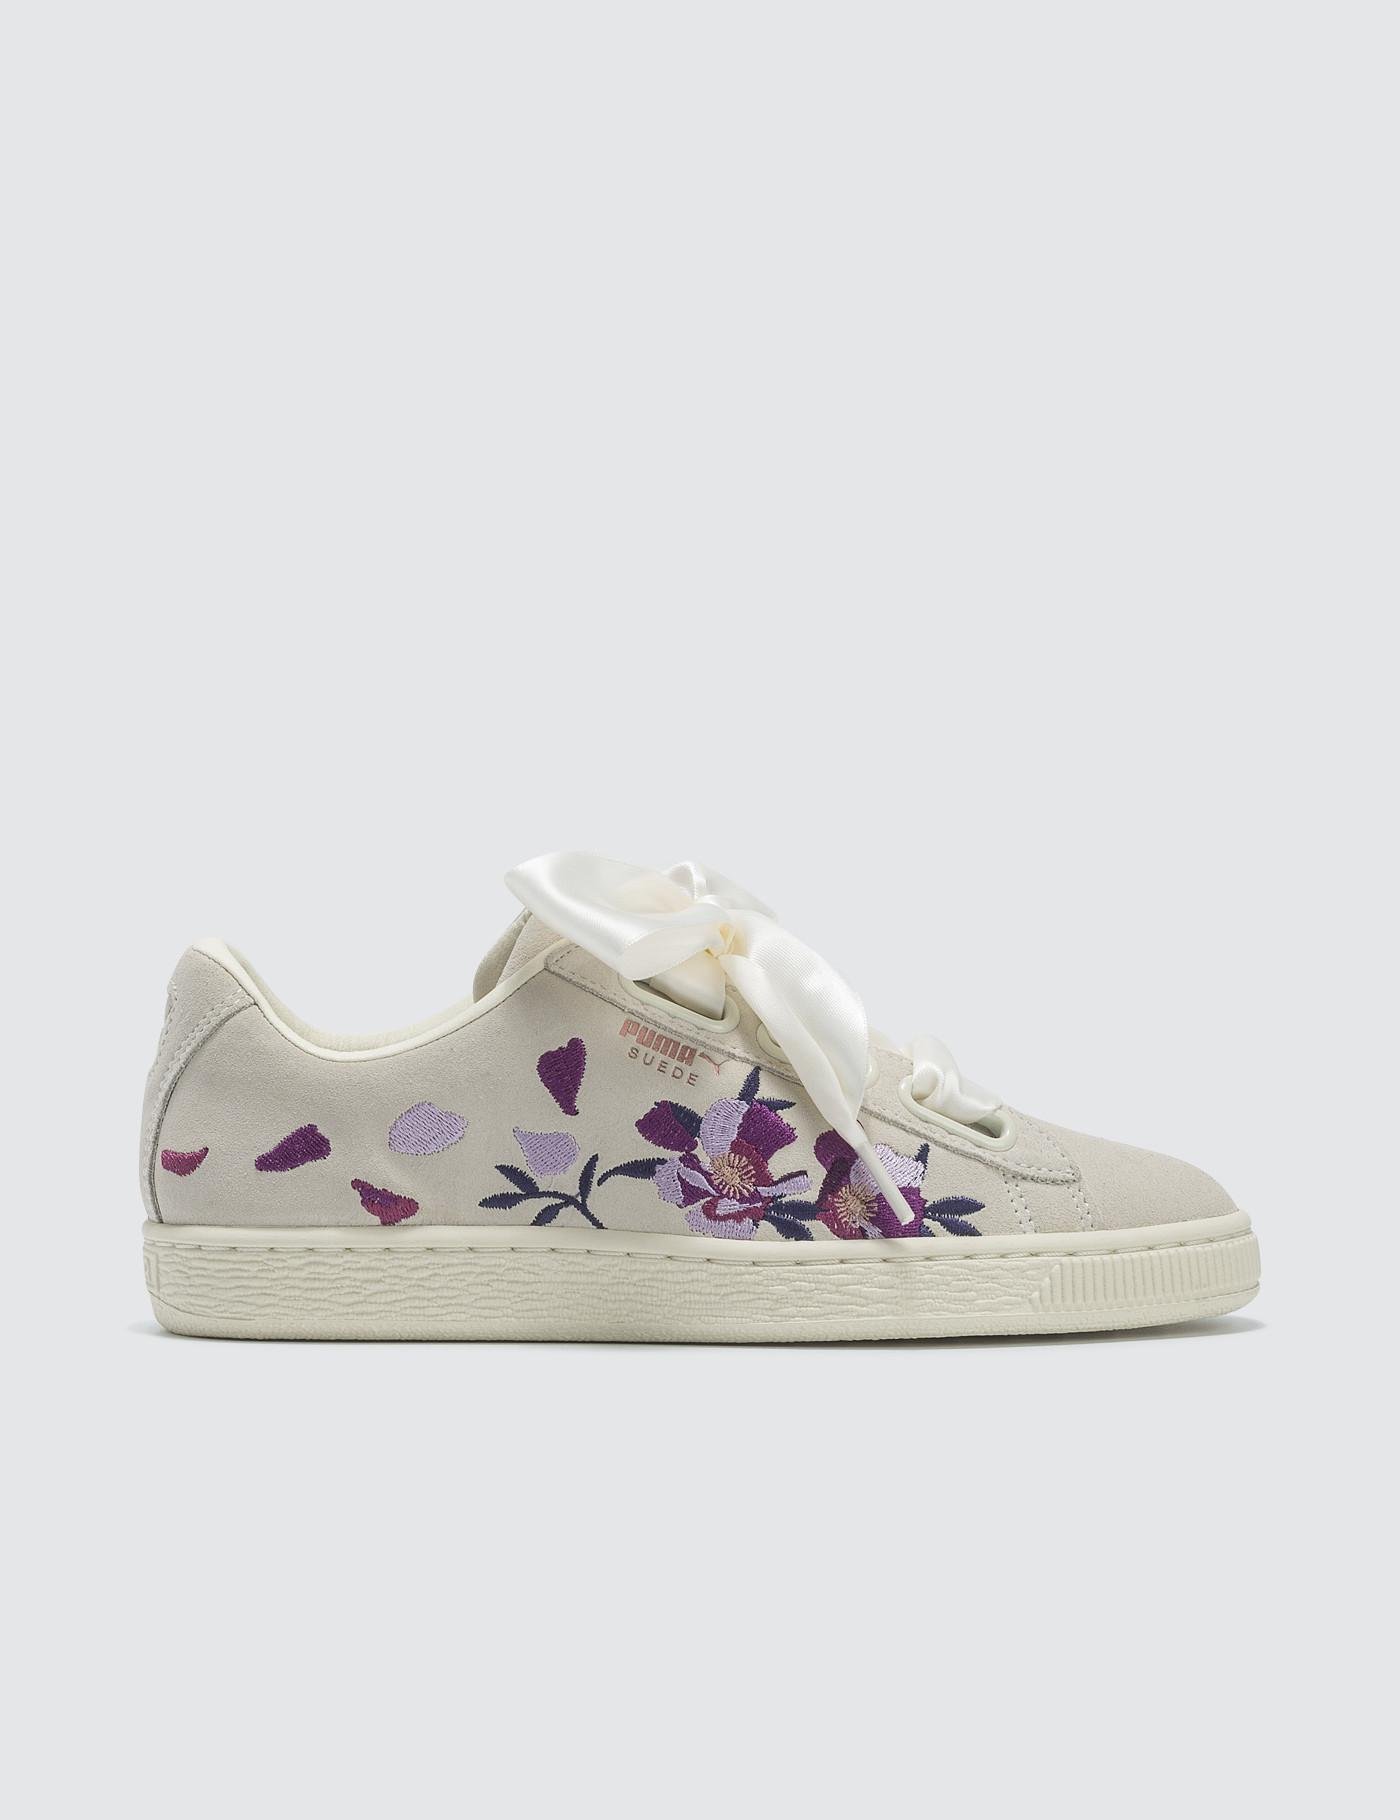 PUMA Suede Heart Flowery Wn's in White 